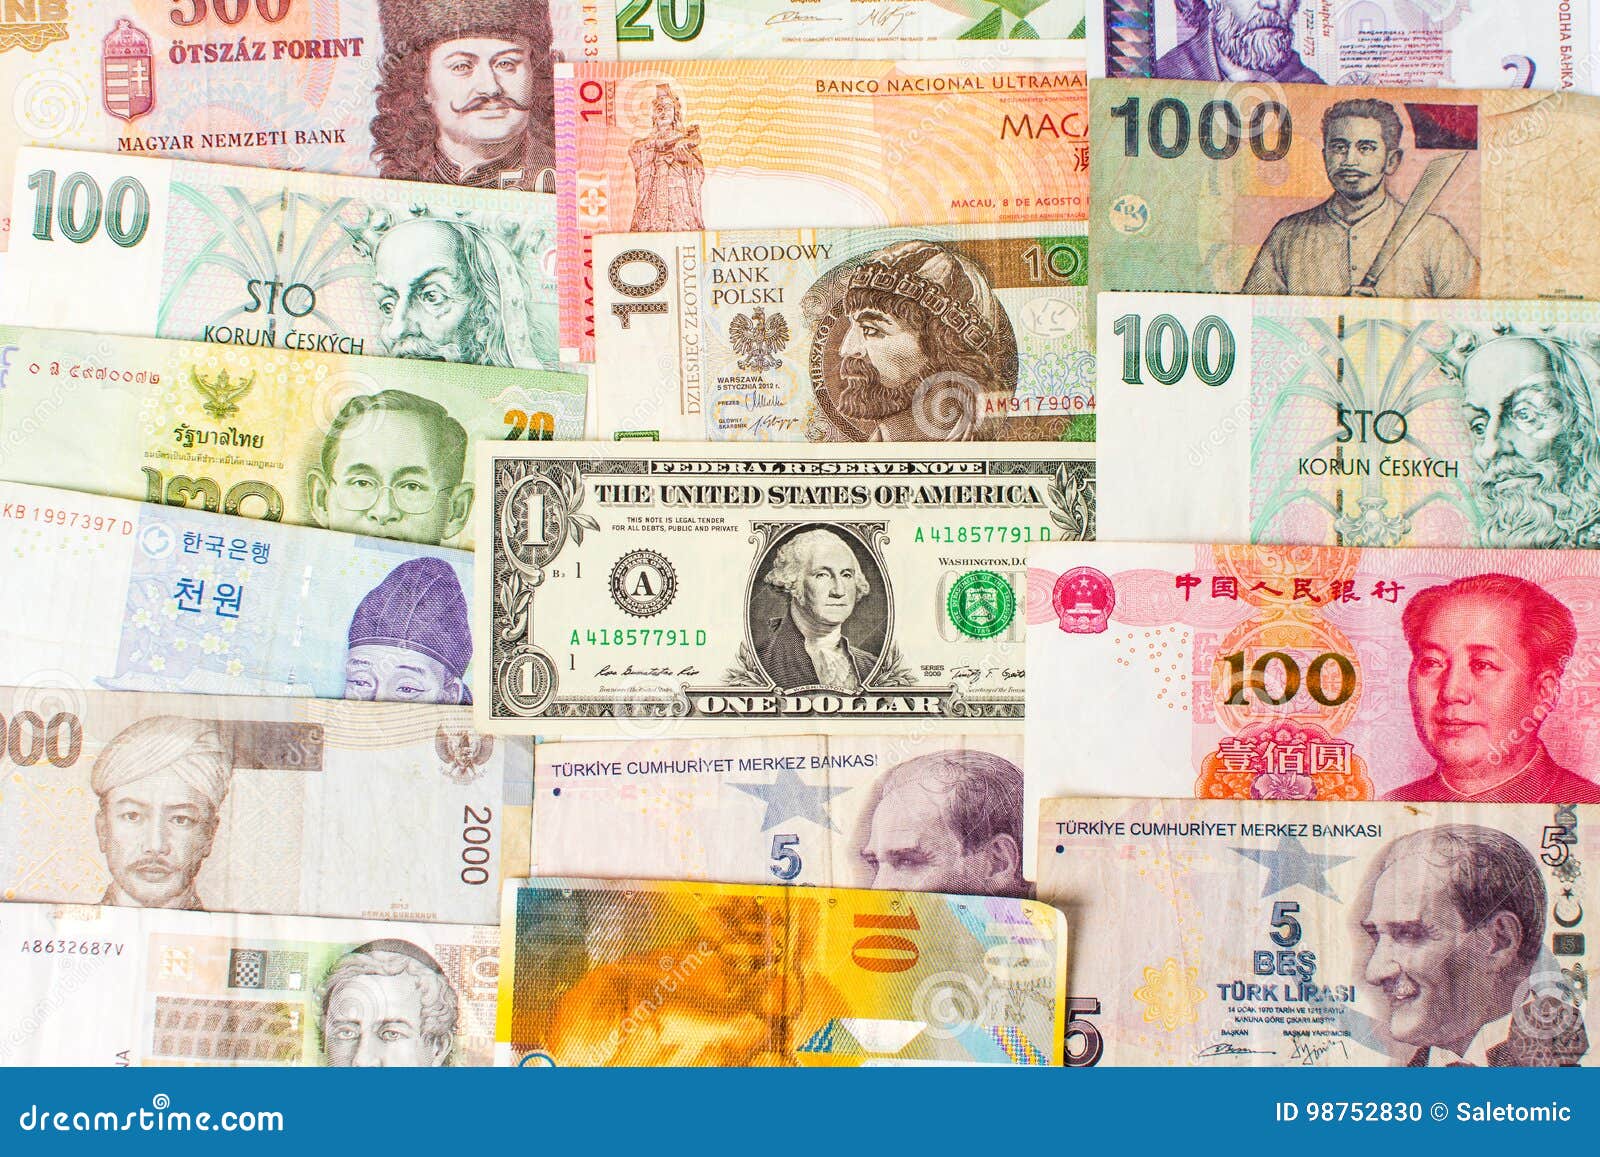 various currencies banknotes forming a background